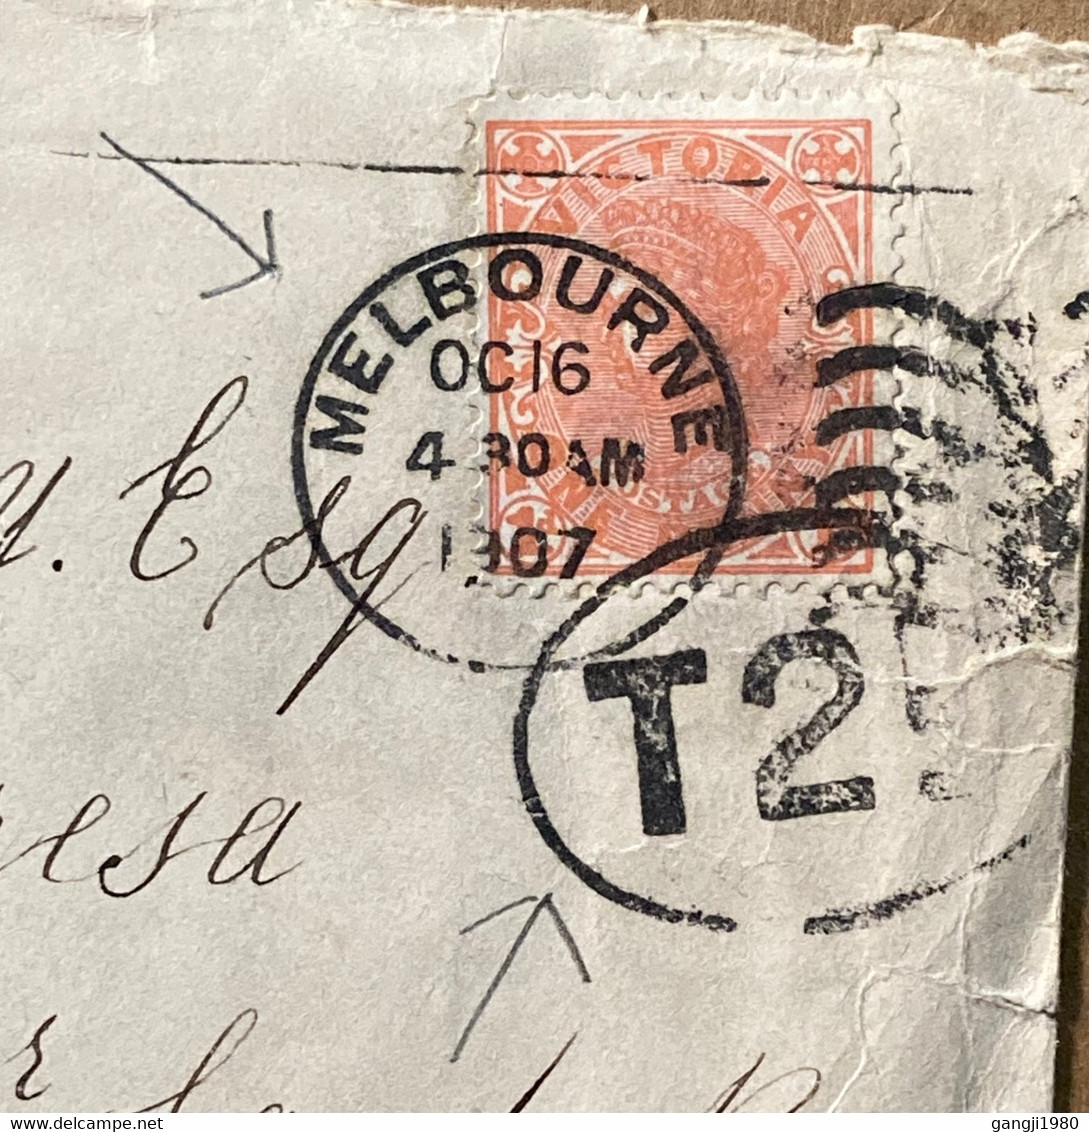 AUSTRALIA-VICTORIA STATE-1907, COVER USED MELBOURNE TO TASMANIA, "T 25" IN CIRCLE, TAX,DUE,  HOBART CITY CANCEL. - Covers & Documents